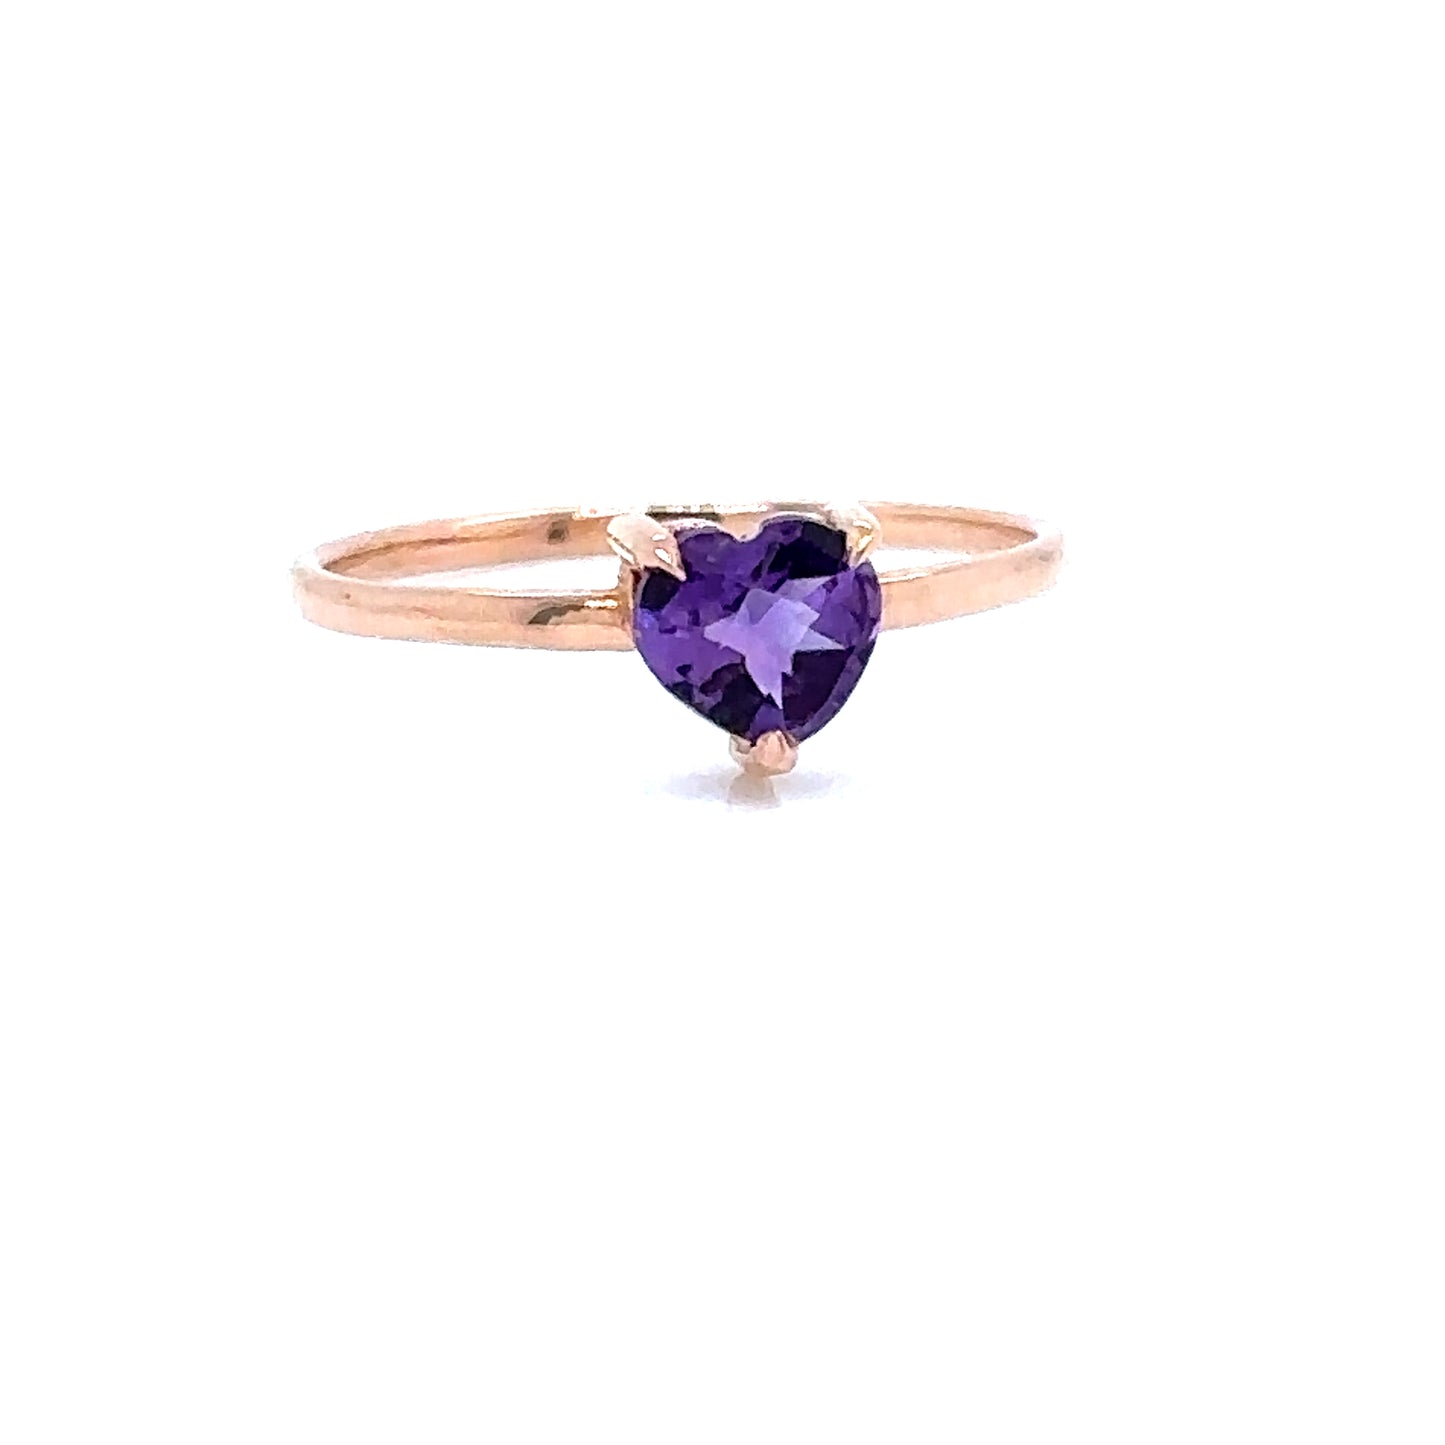 IMMEDIATE DELIVERY / Small Amethyst Heart Ring / 14k Rose Gold / Size 7.5